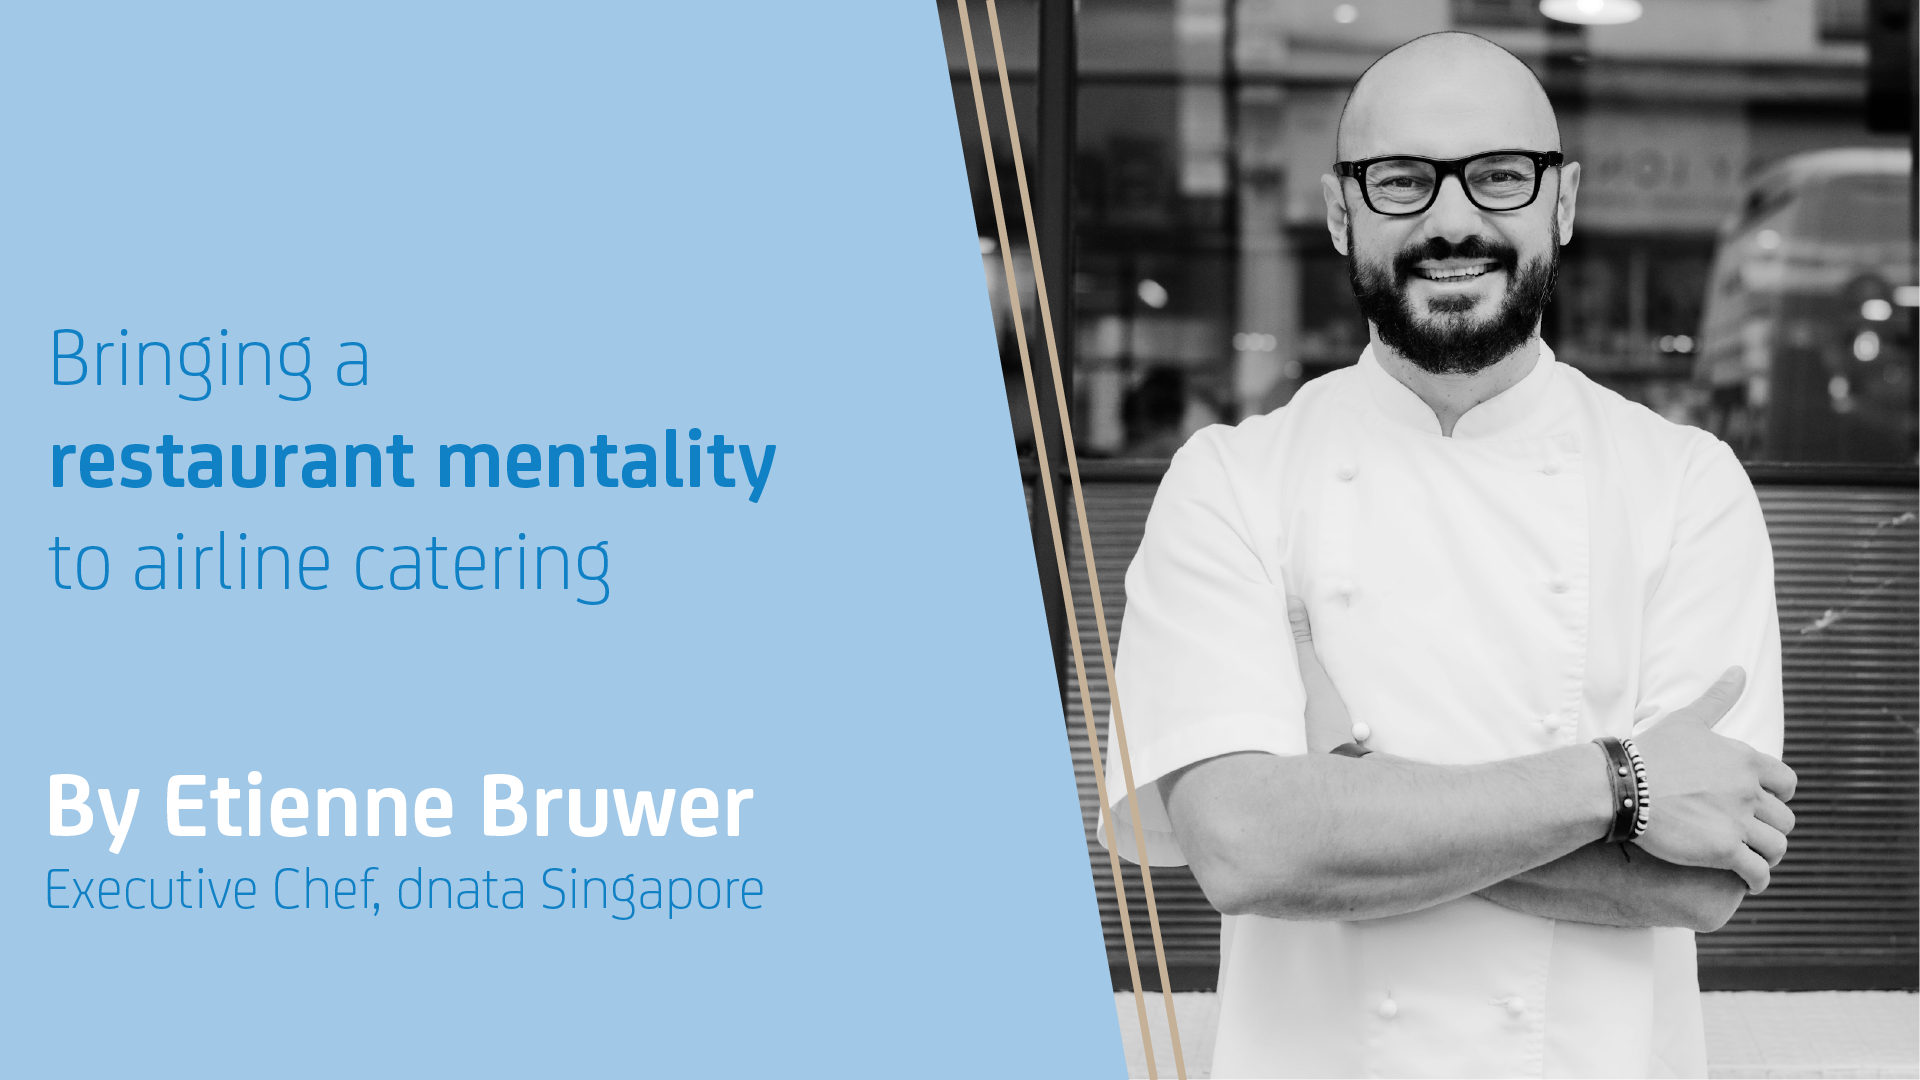 Bringing a restaurant mentality to airline catering by Etienne Bruwer, Executive Chef, dnata Singapore